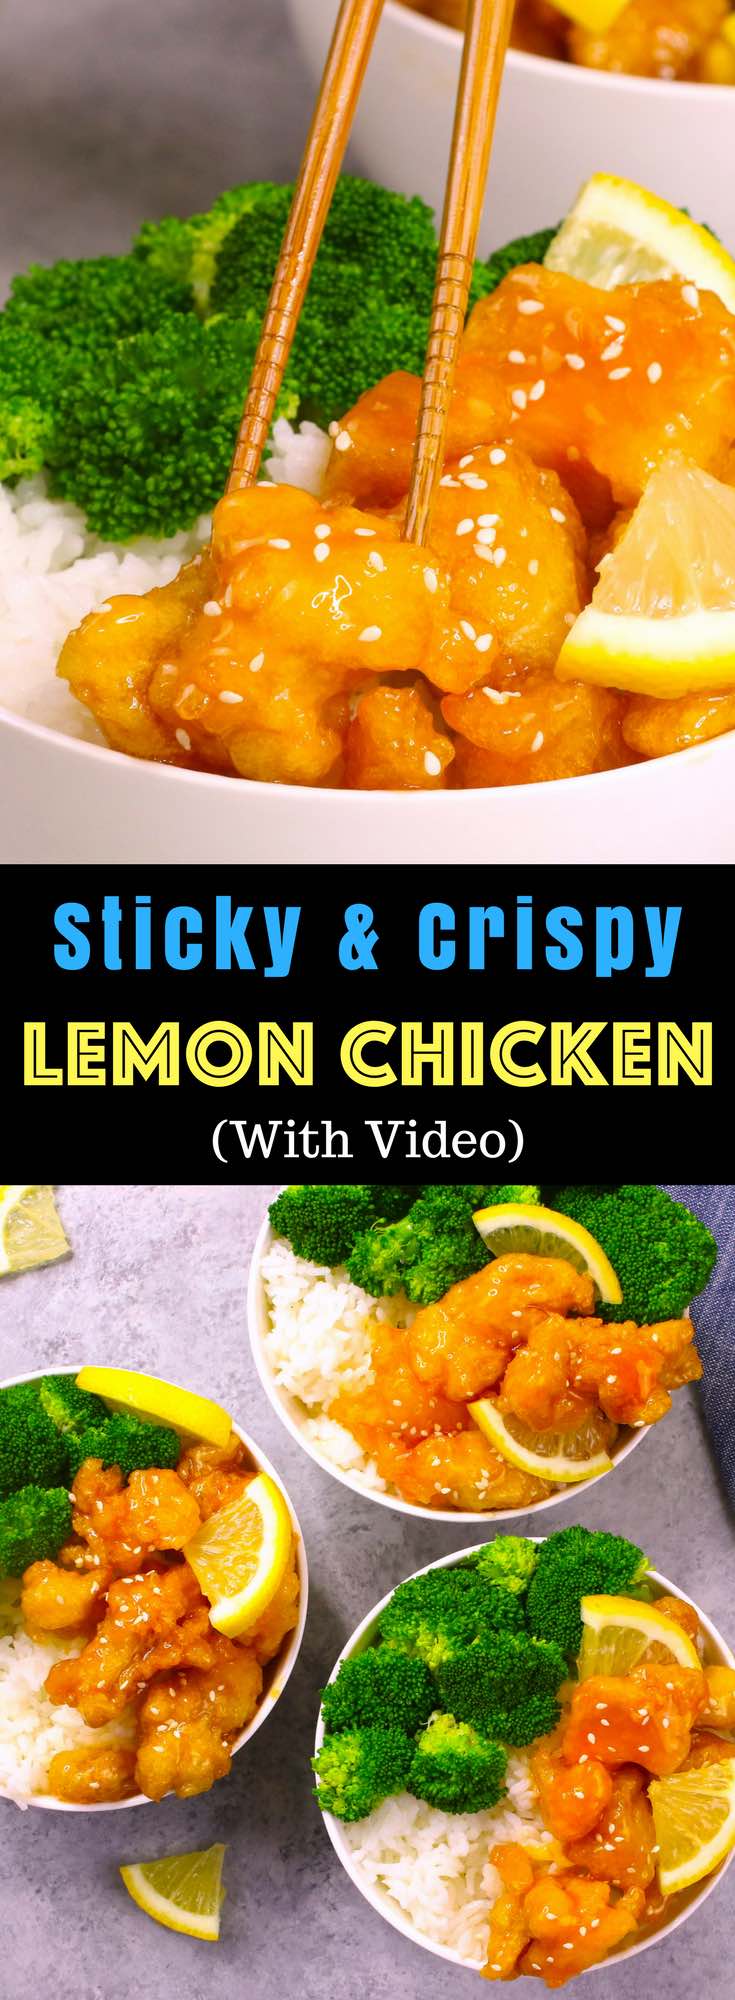 Easy, crispy and most unbelievably delicious Lemon Chicken with Rice Bowls. So much better than take outs! All you need is only a few ingredients: chicken breast, lemon, salt & pepper, egg, oil, sugar, and cornstarch. One of the best Asian dinner ideas! Served with rice and broccoli. Quick and easy dinner recipe. Video recipe. | Tipbuzz.com #LemonChicken